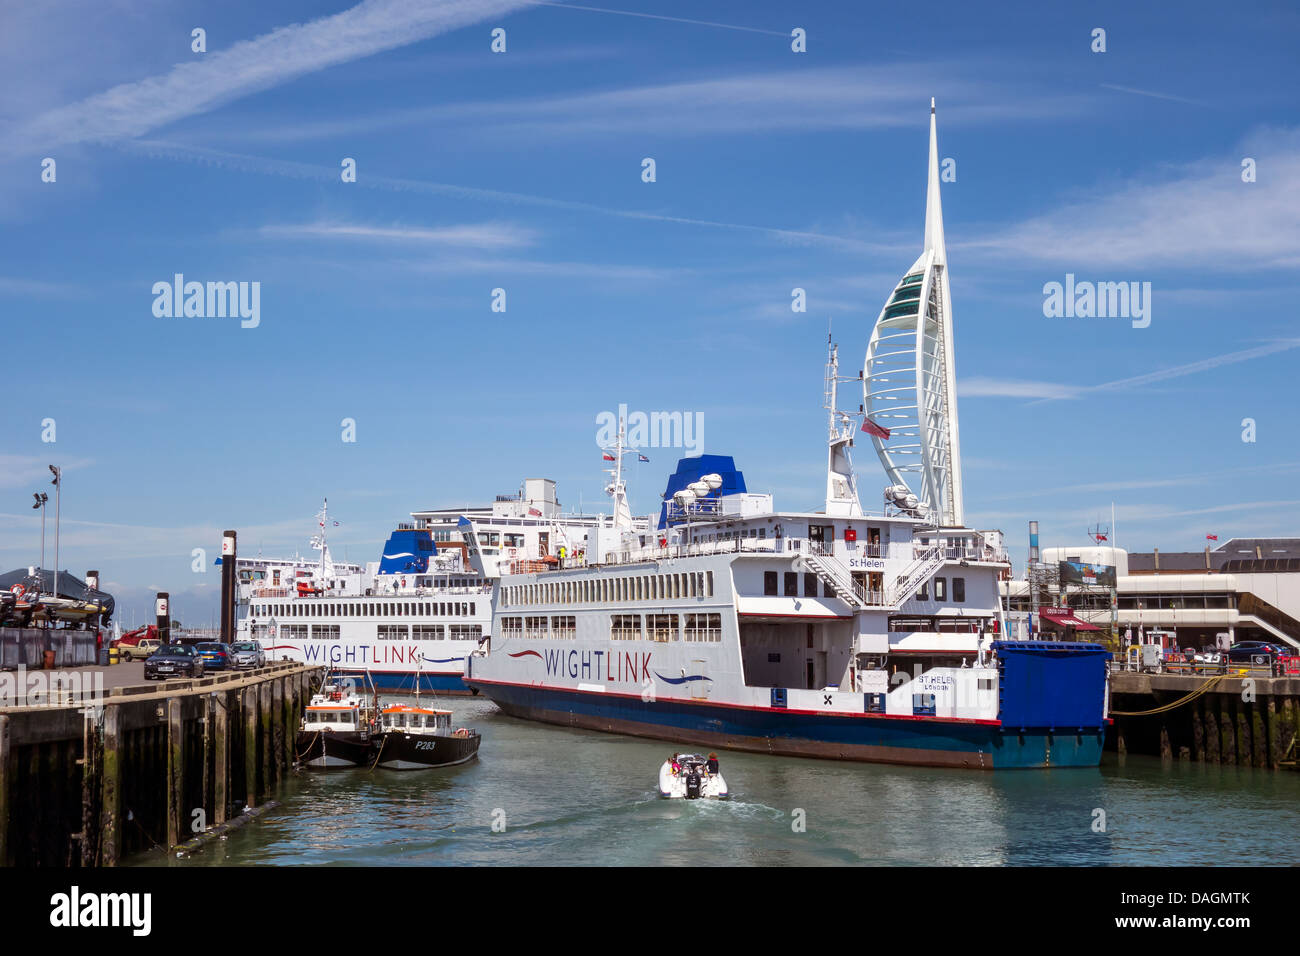 Wightlink Ferry Ferries Portsmouth Harbour The Spinnaker Tower Stock Photo